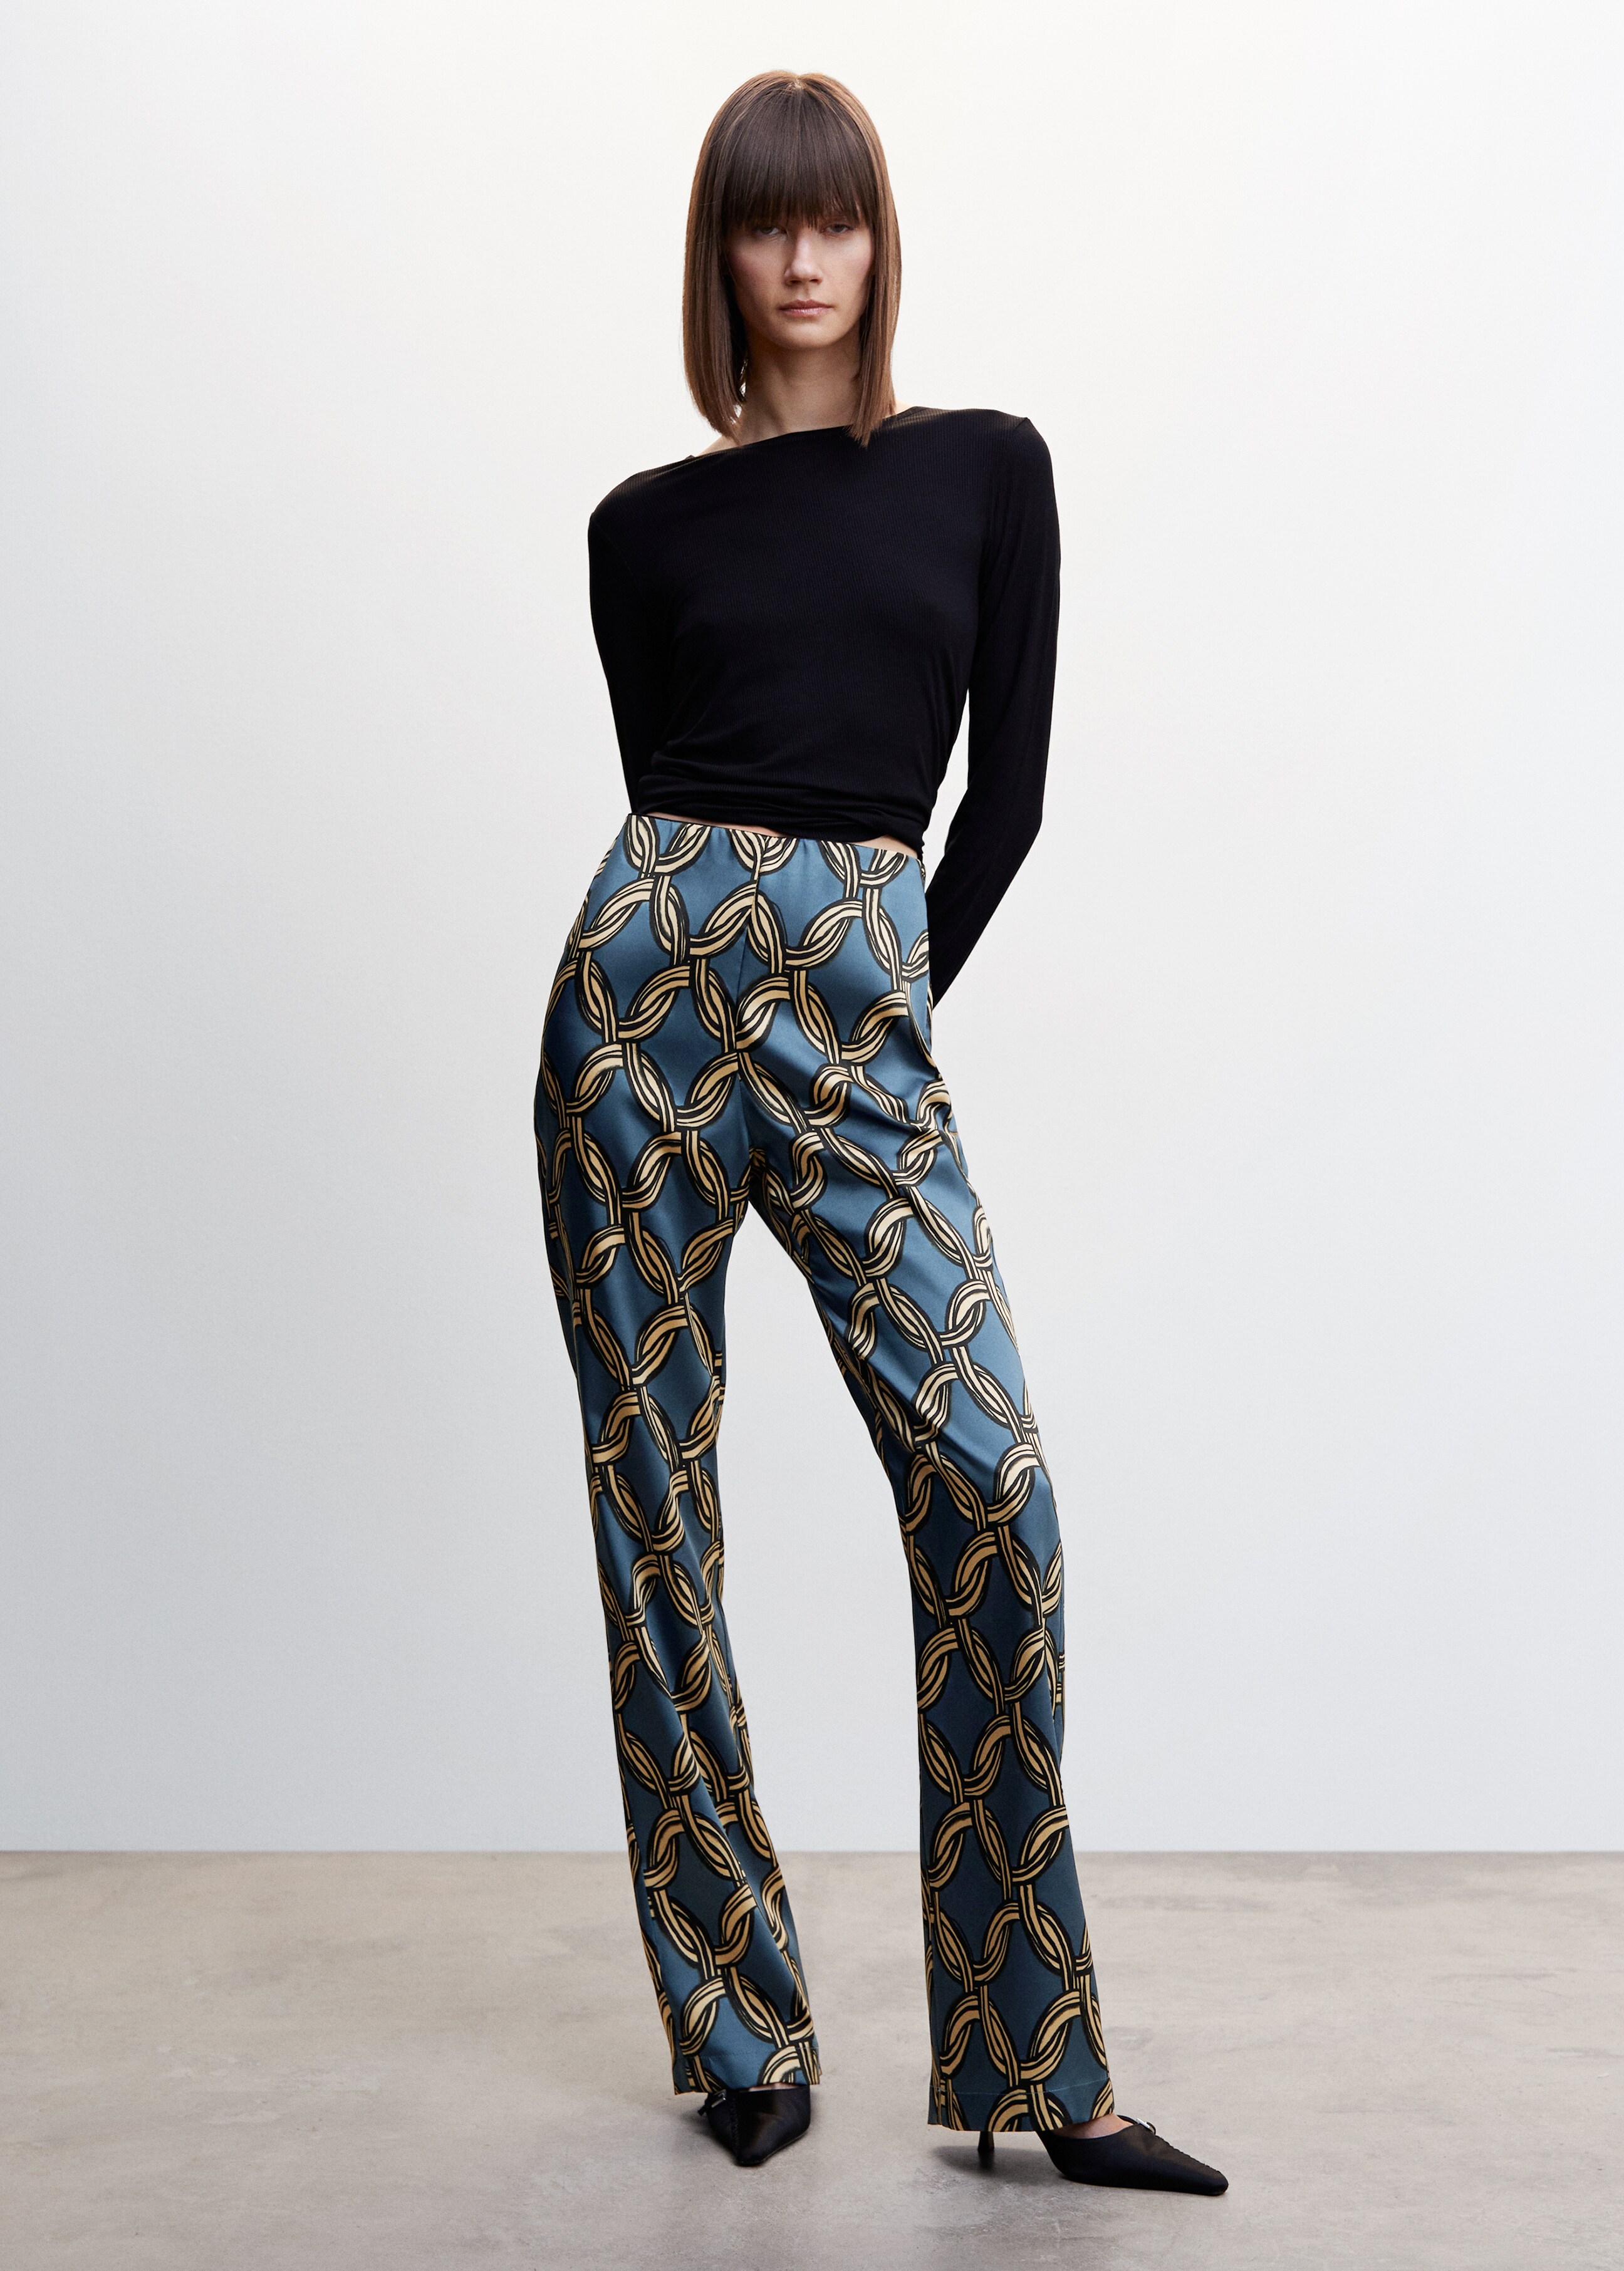 Satin printed pants - Details of the article 6